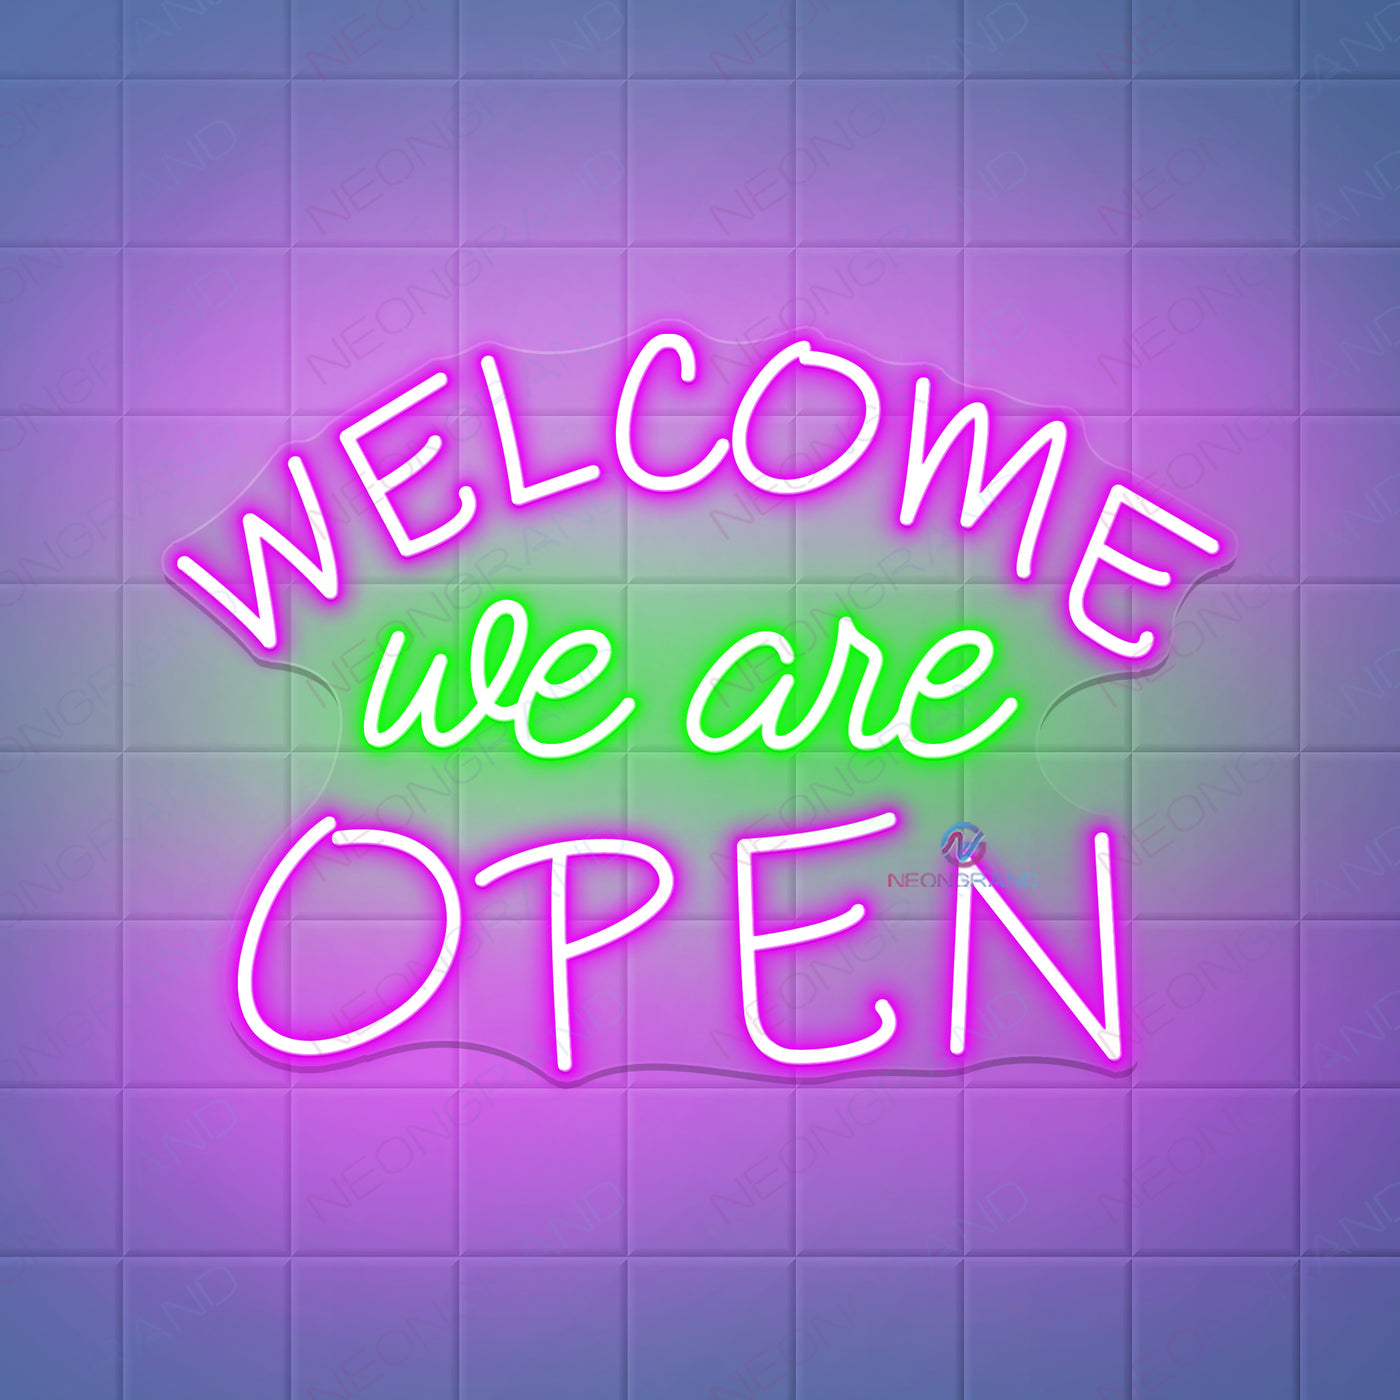 Open Neon Sign Welcome We Are Open Business Led Light